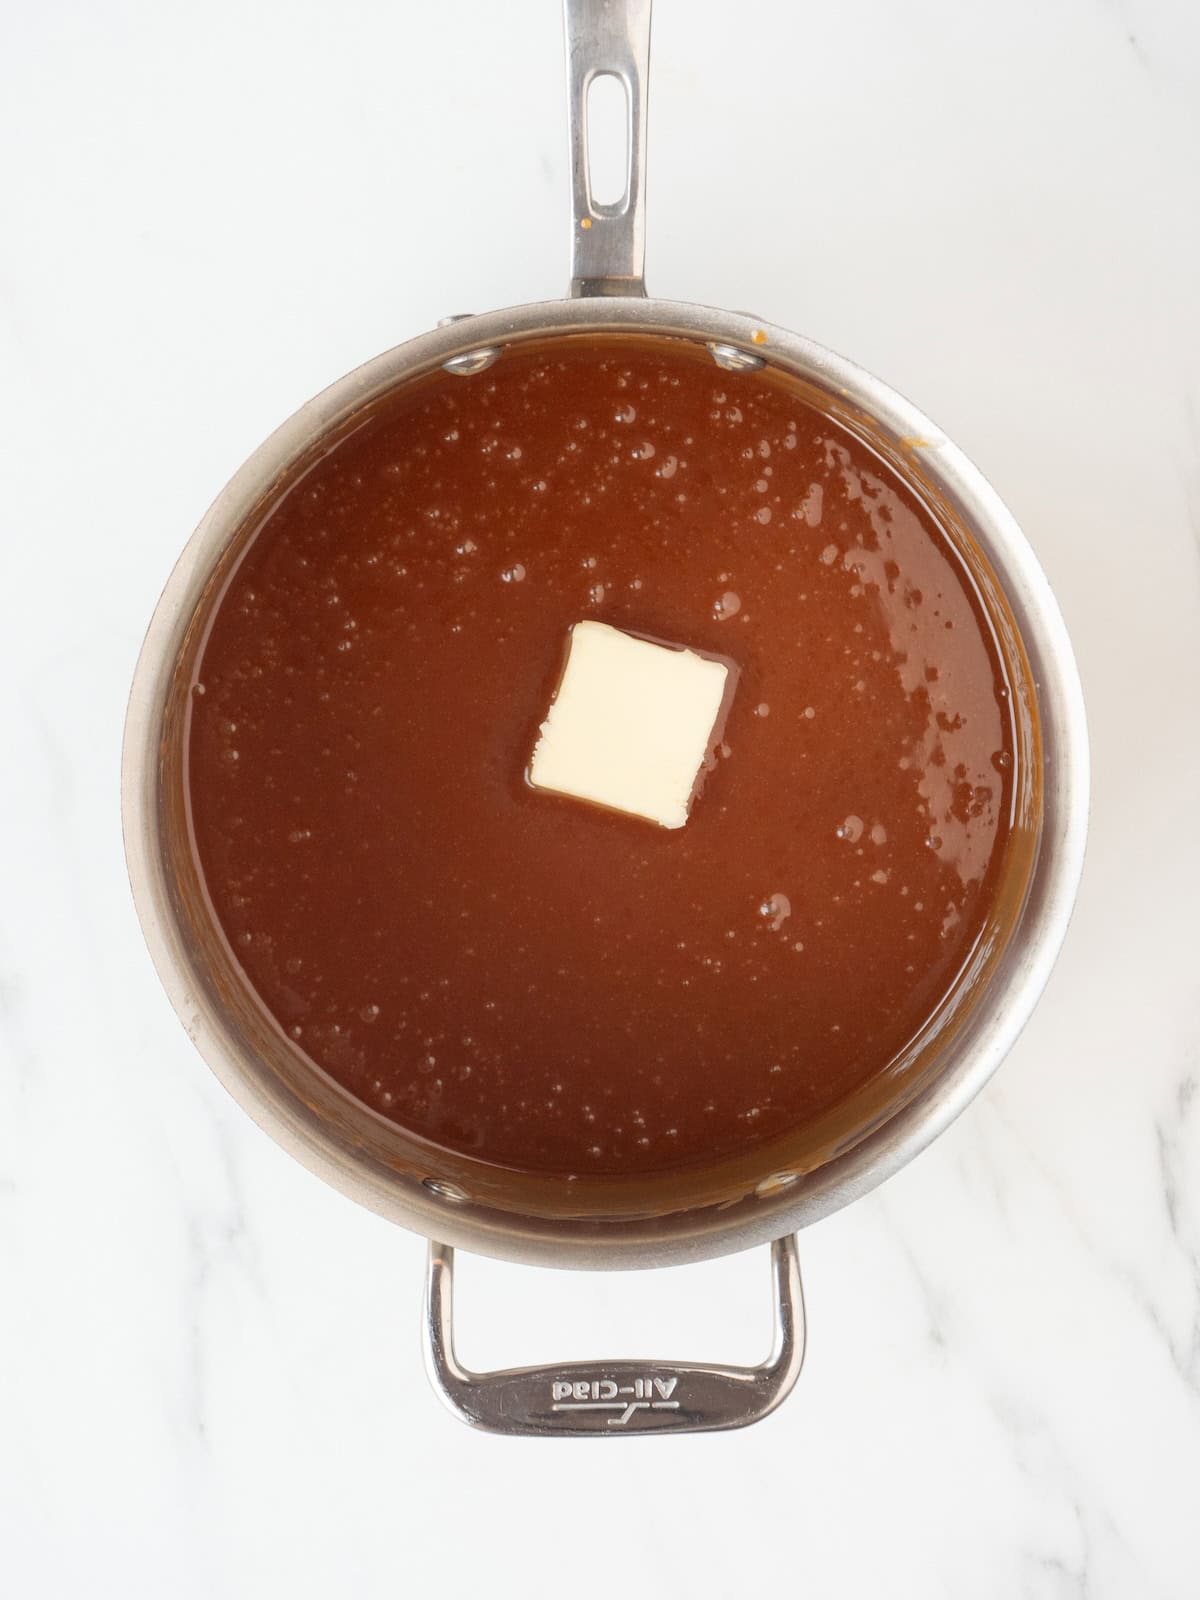 A saucepan with caramel sauce made from sugar, water and cream, and unsalted butter just added.